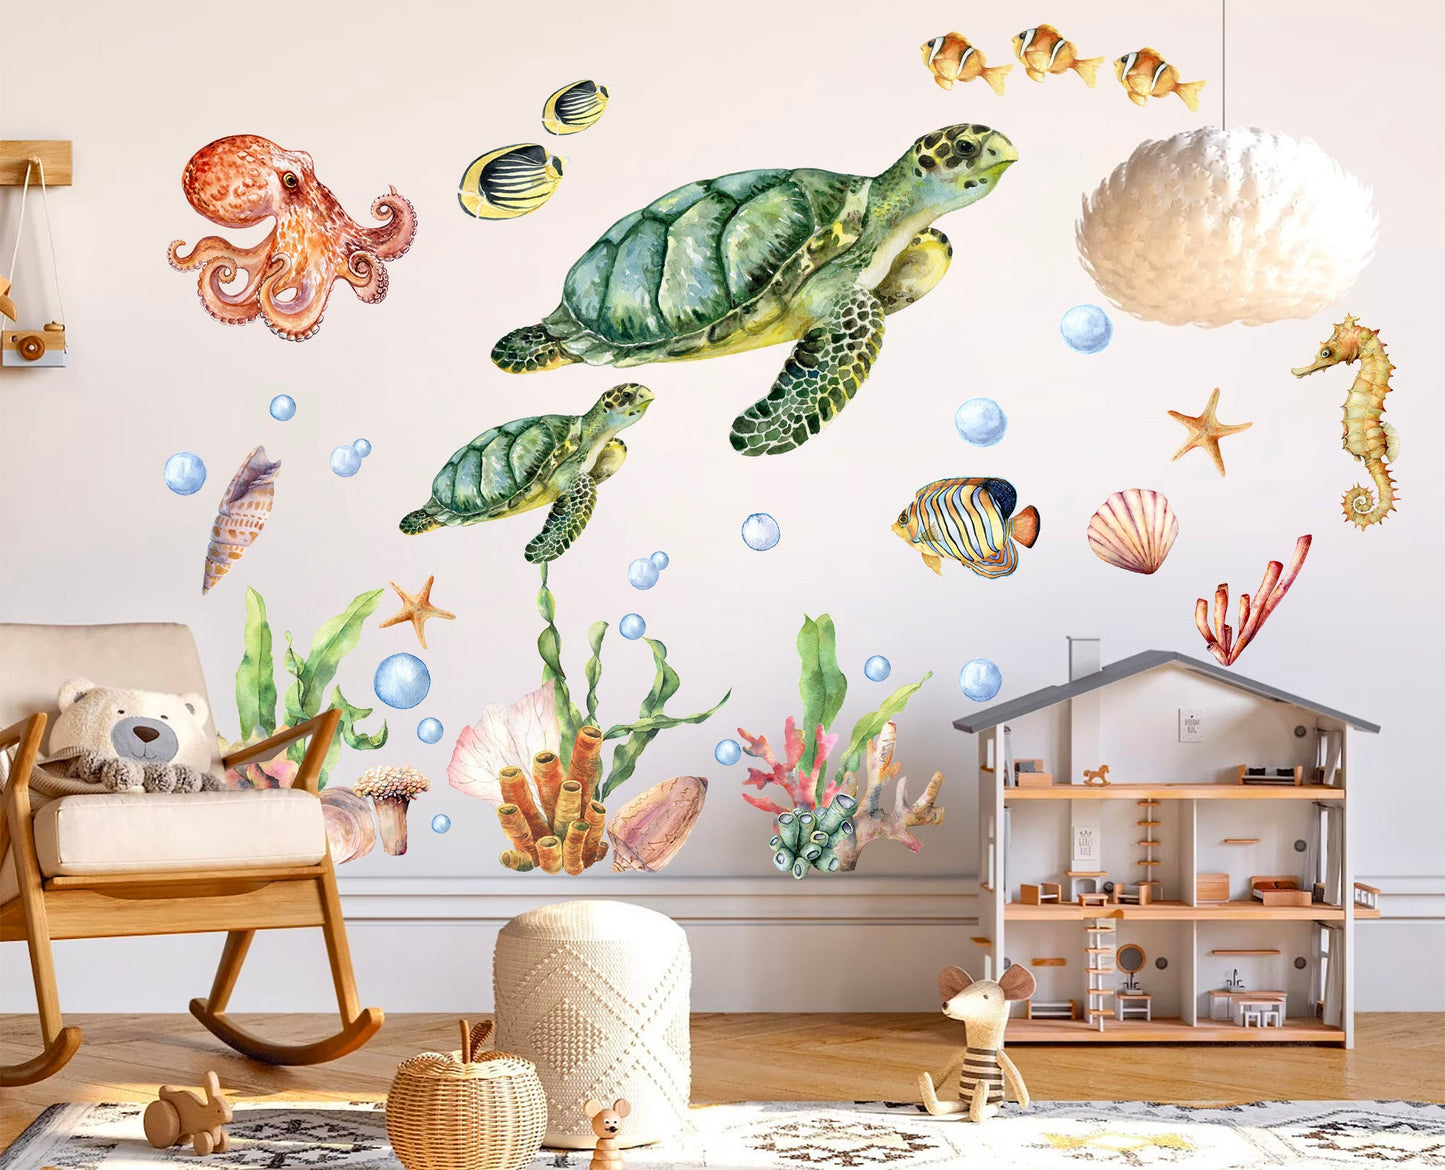 Underwater Adventure Wall Decal - Turtle Mom with Baby Swimming Among Octopus and Seahorse Friends - BR146